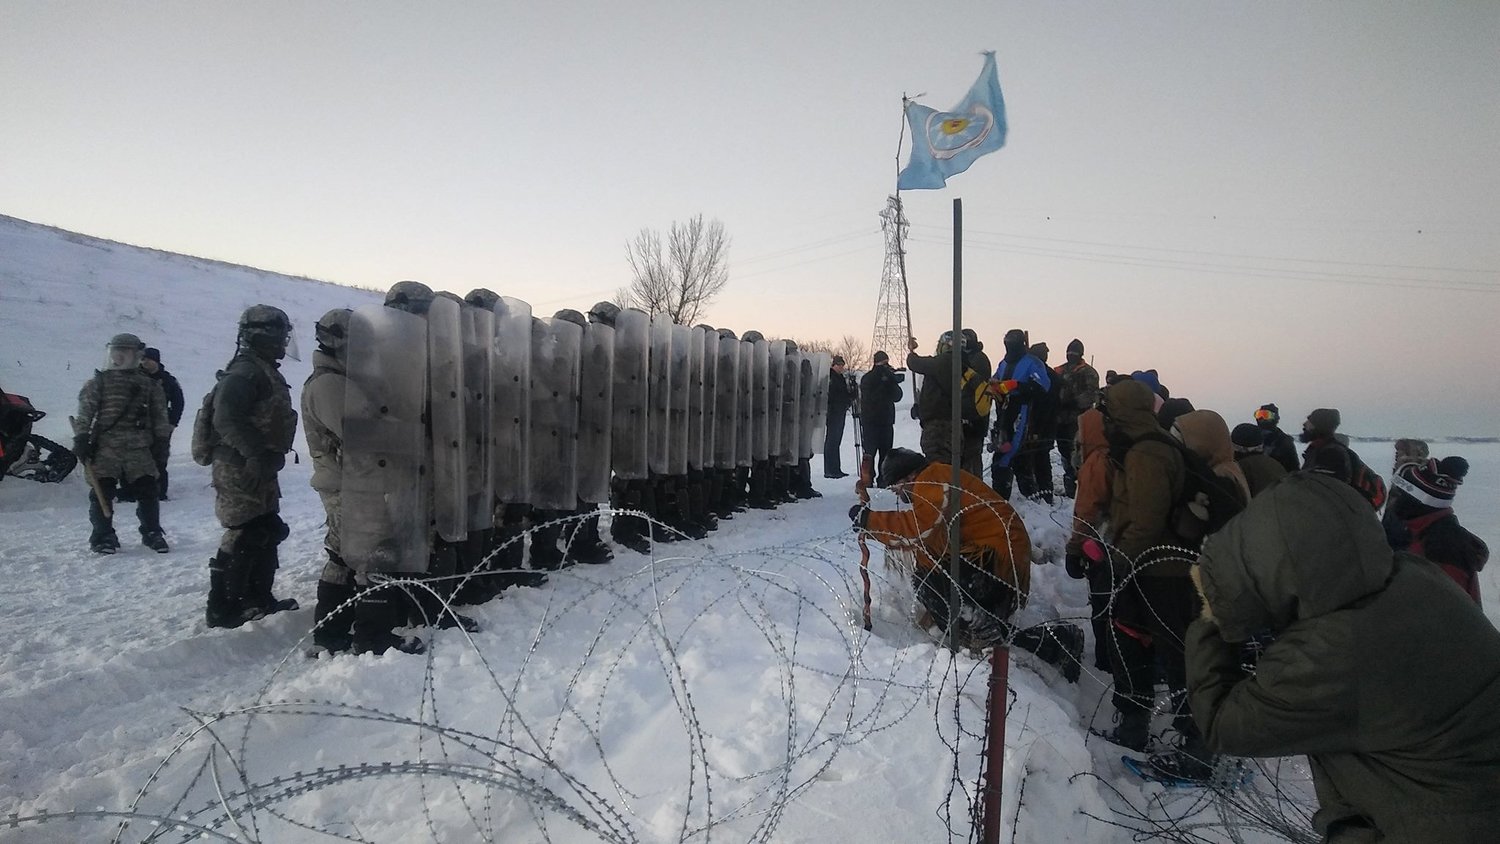 Department of the Army takes the lead on Dakota Access Pipeline